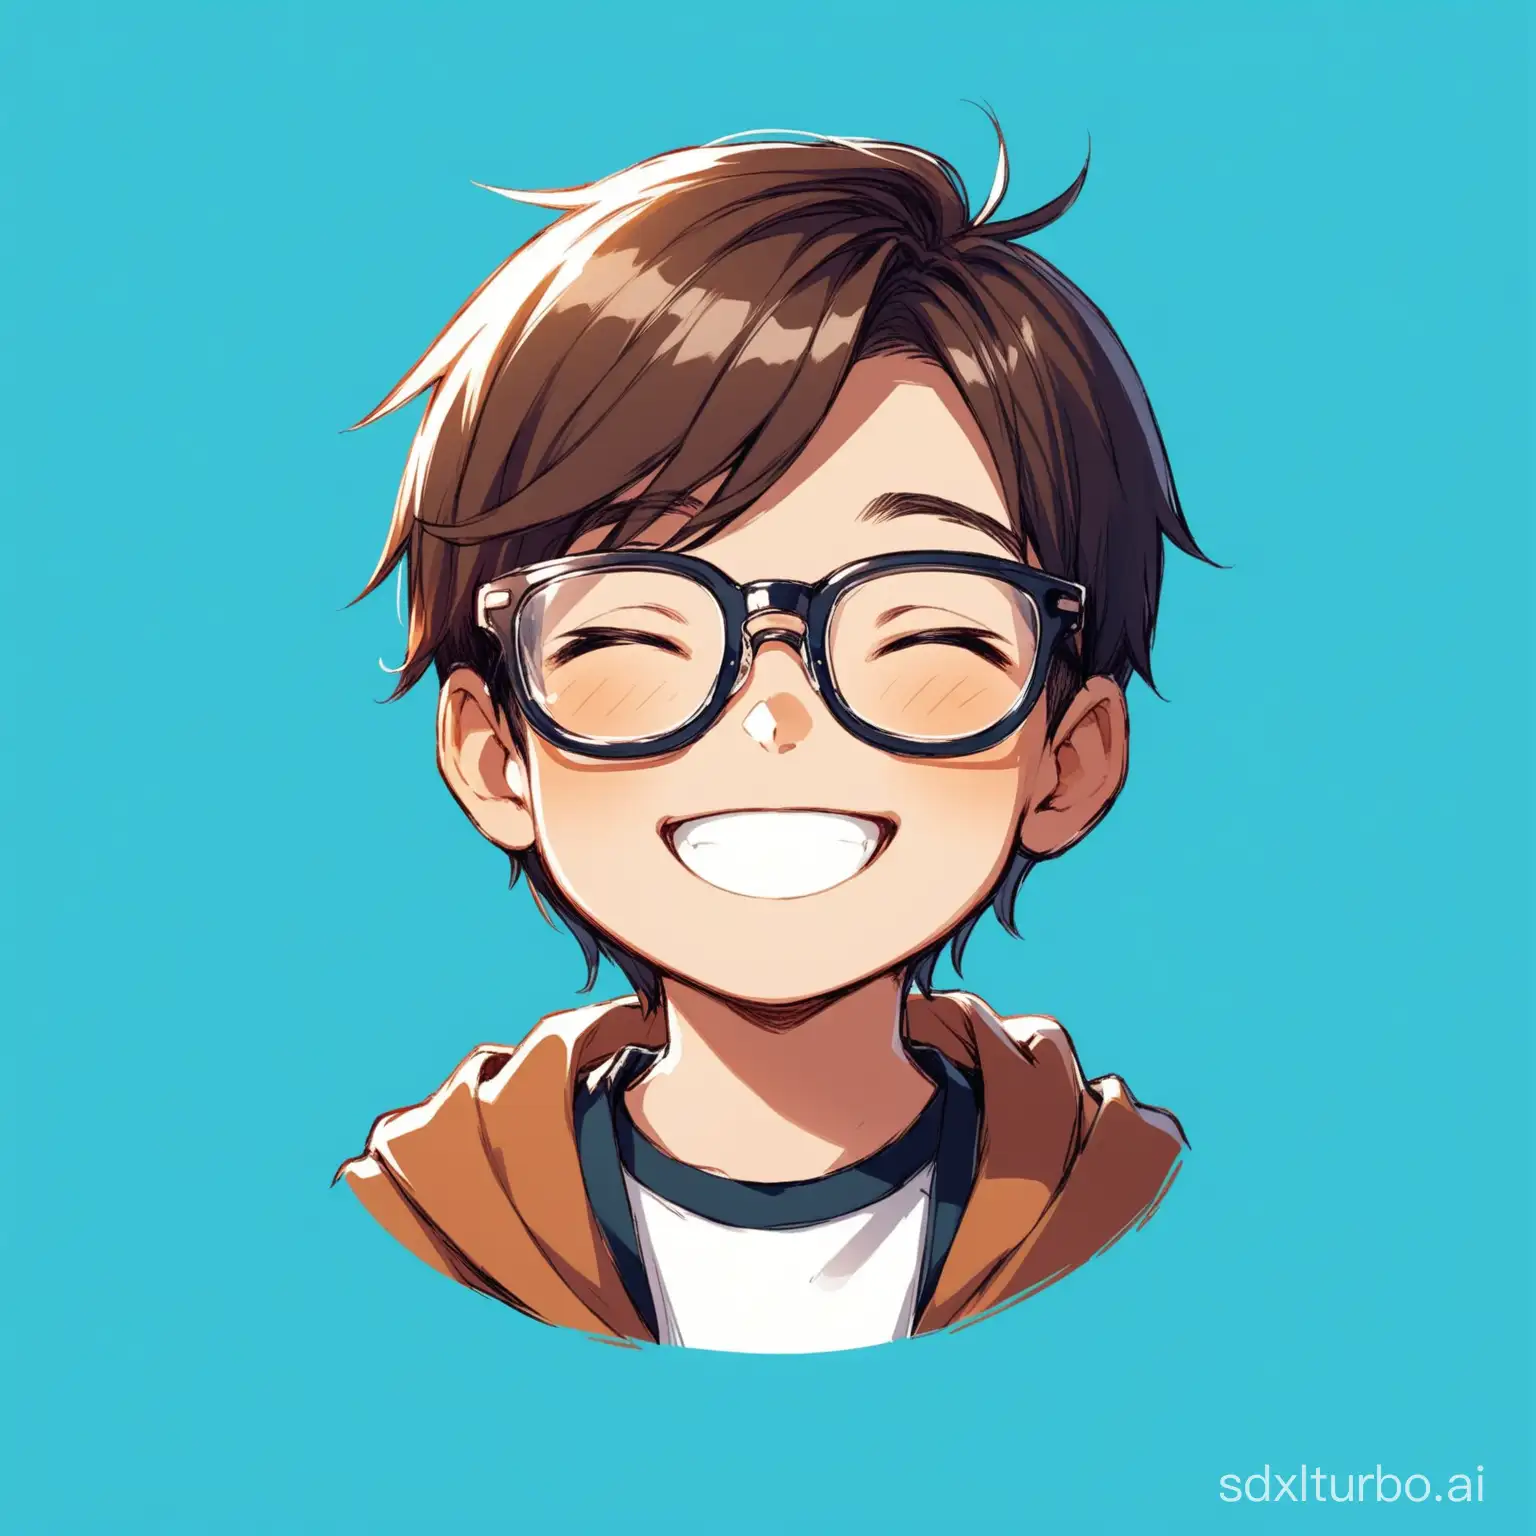 Happy boy with glasses against a blue background